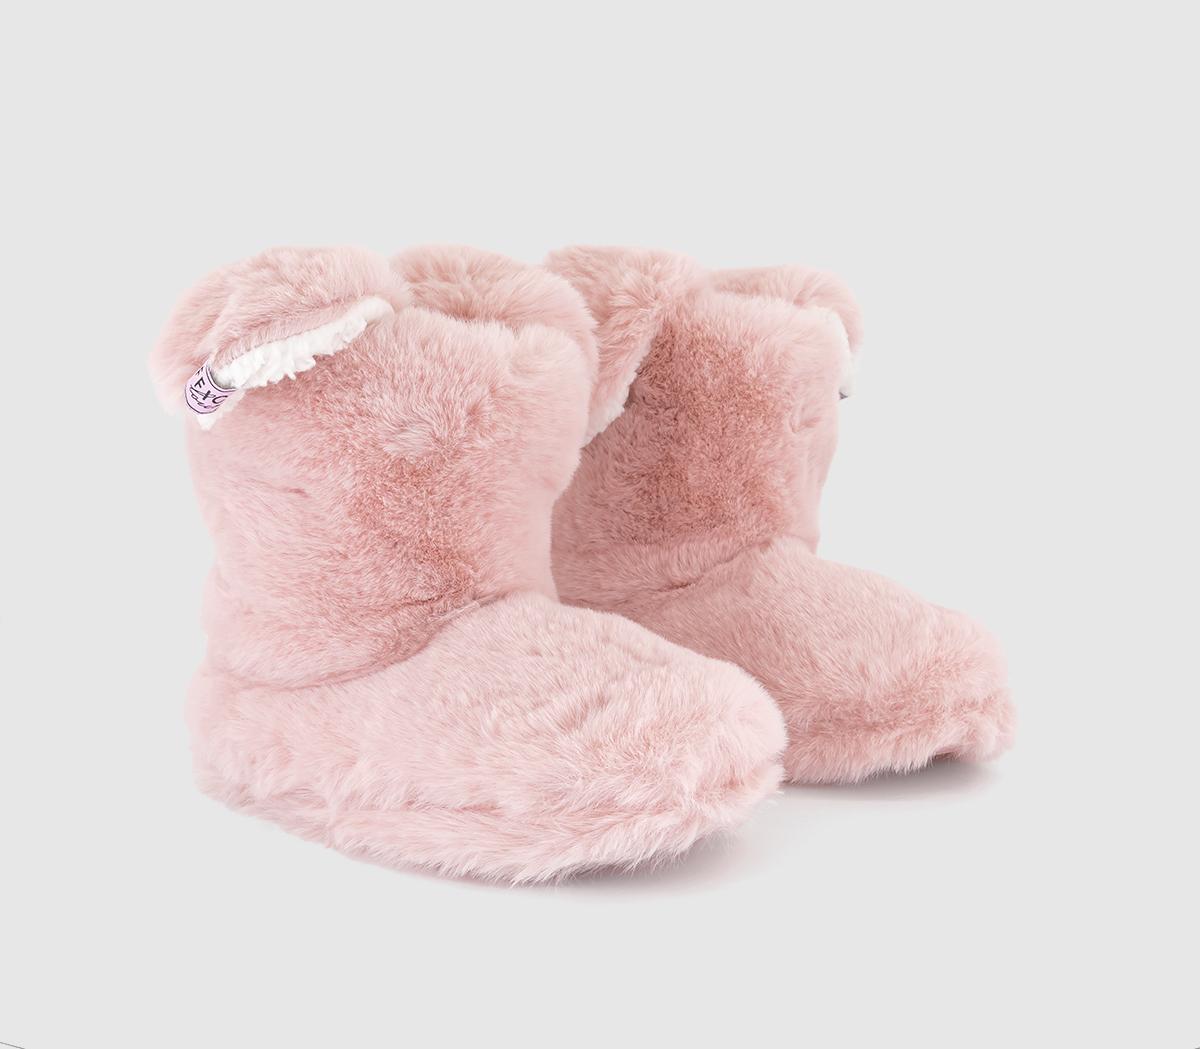 OFFICE Lounge Womens Ruby Bunny Slipper Boots New Pink, 5-6